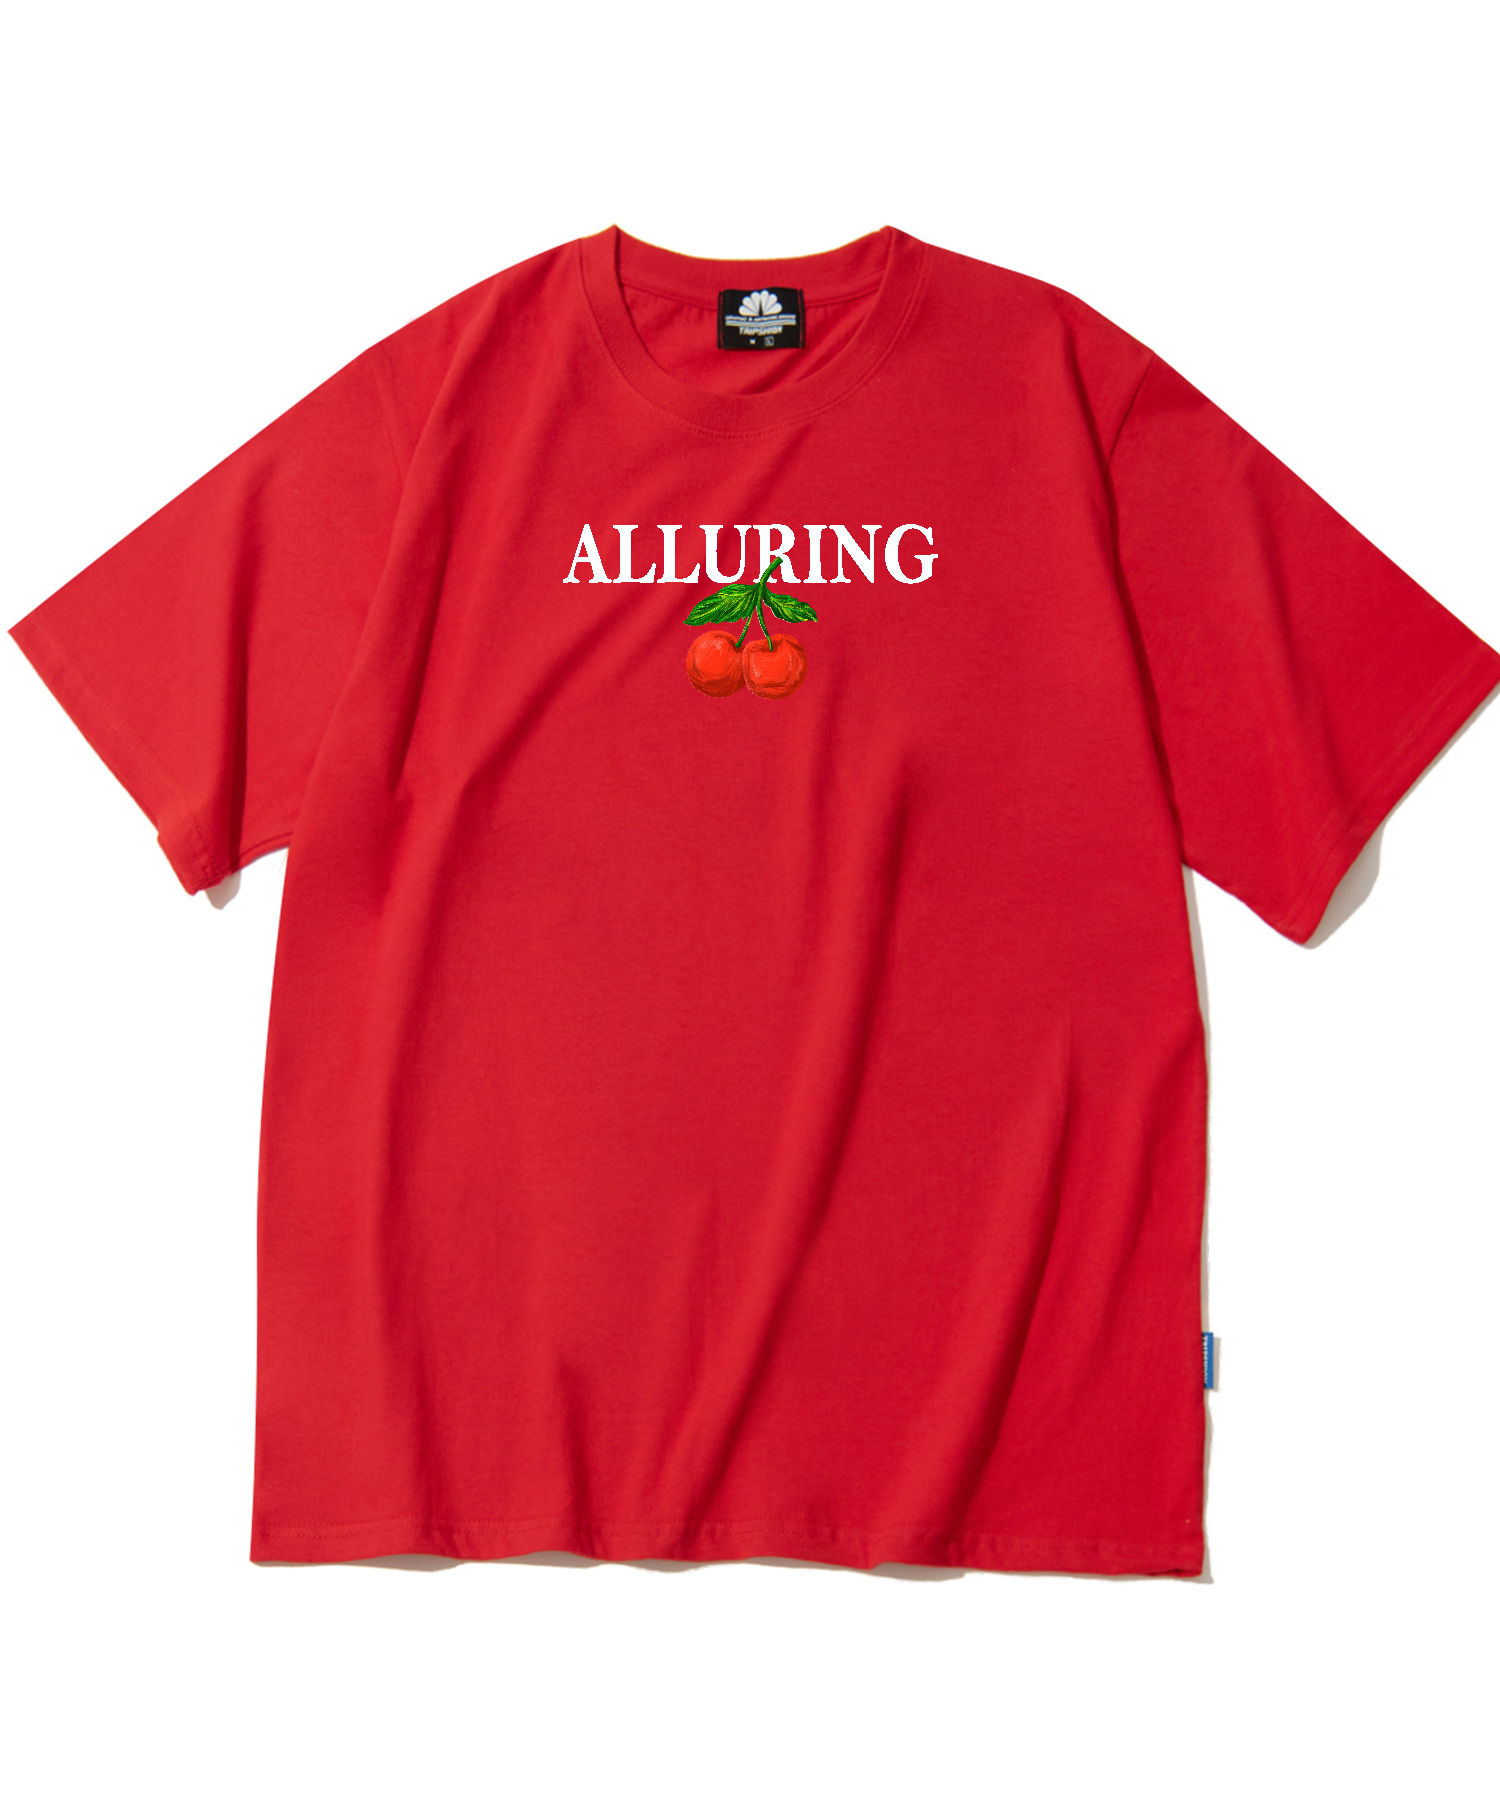 ALLURIG CHERRY GRAPHIC T-SHIRTS - RED